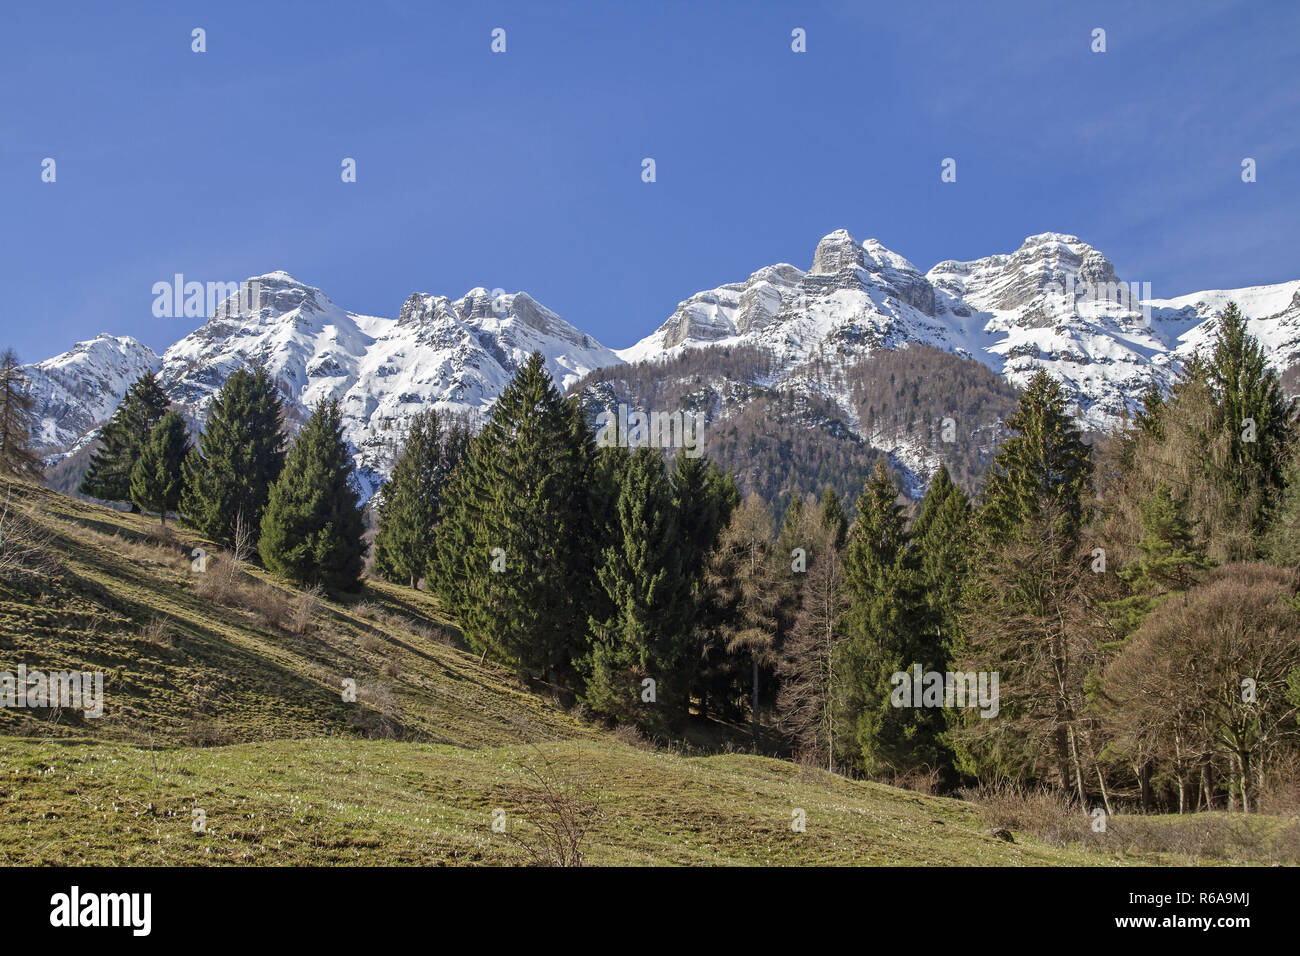 The Vigolana Mountains Are A Group Of Mountains In Trentino With Peaks That Rise To Almost 2200 M And Belong To The Vicentine Alps Stock Photo